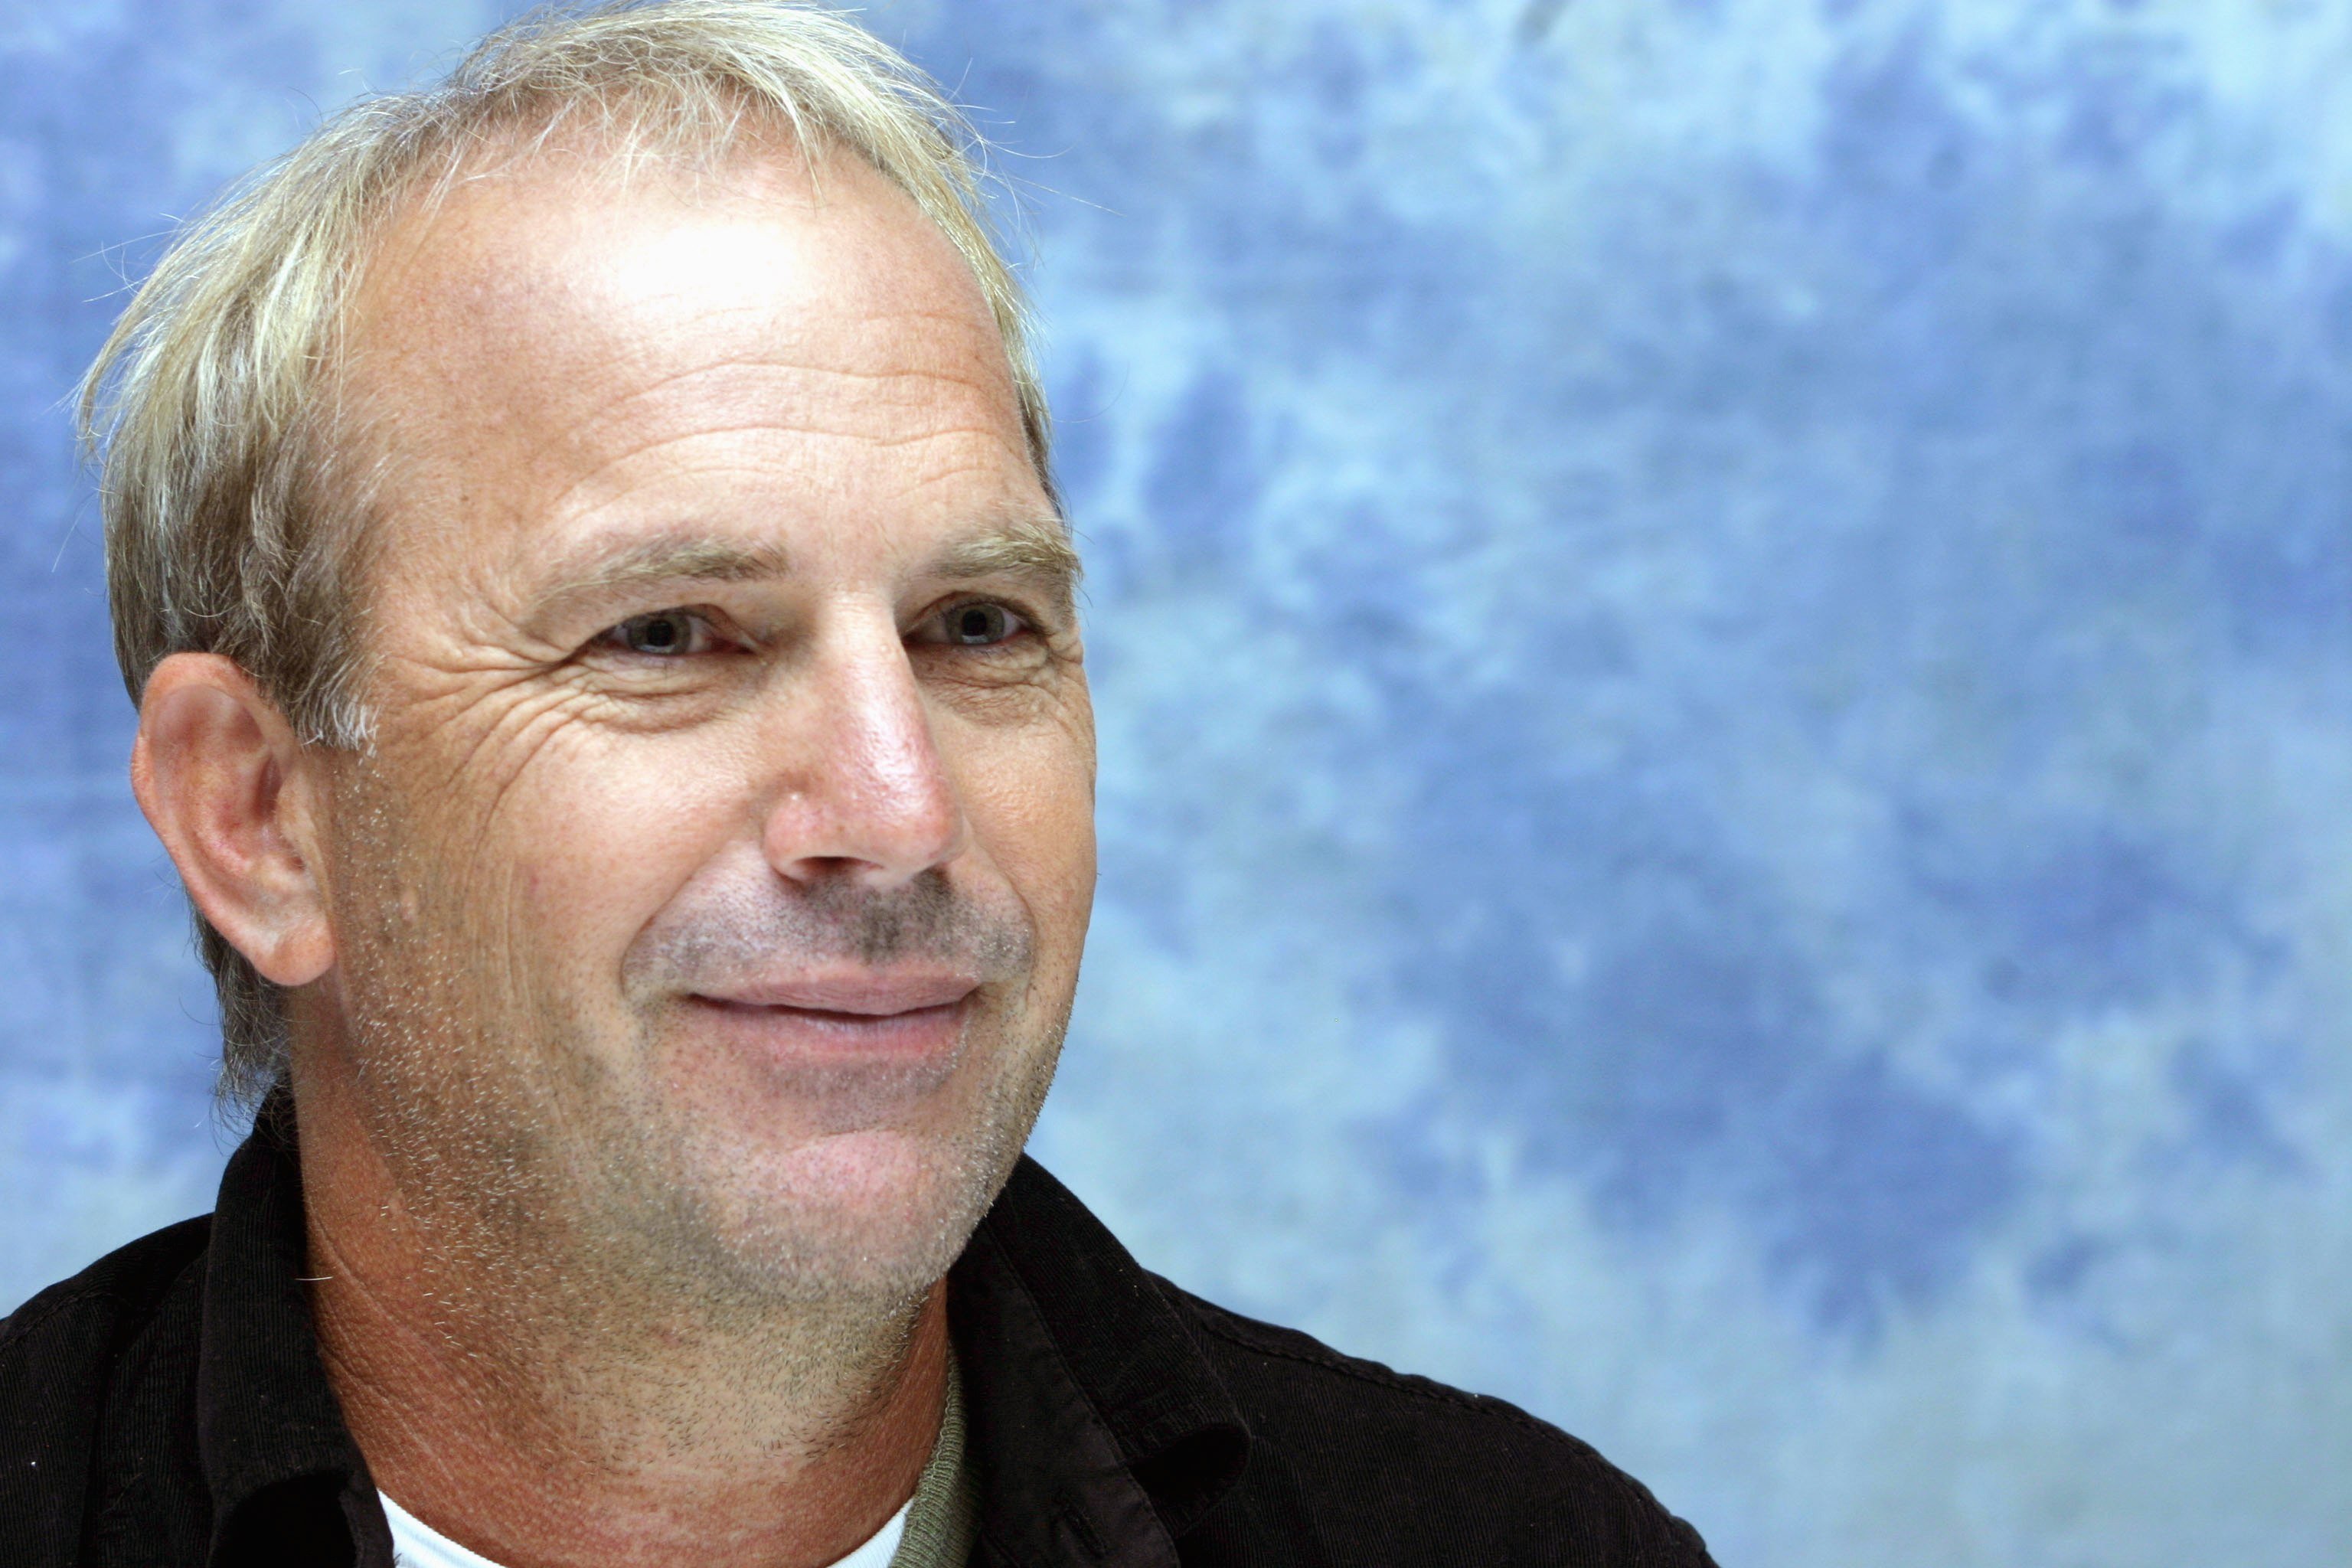 Kevin Costner was pictured during a 2006 speaking engagement in Ontario, Canada. | Photo: Getty Images